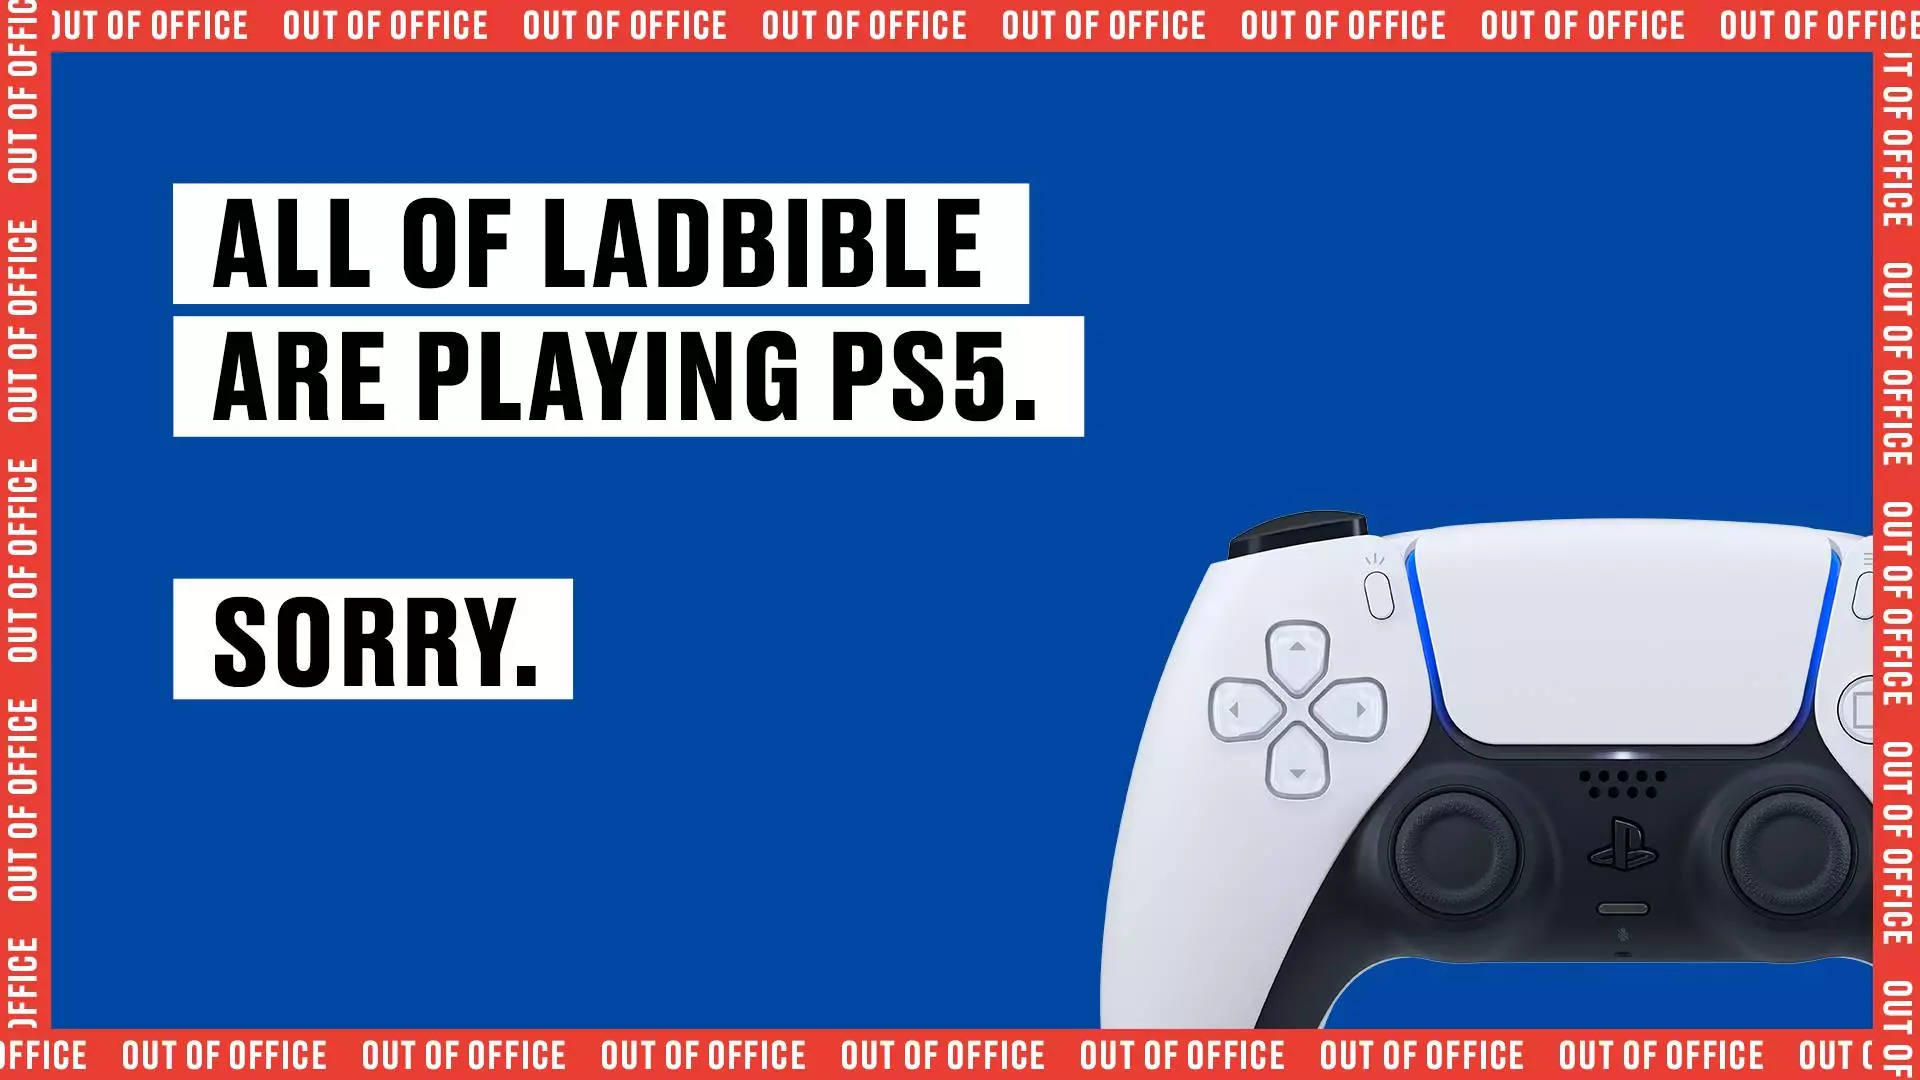 We’ve Given LADbible Staff The Day Off So They Can Play The New PlayStation 5 Console